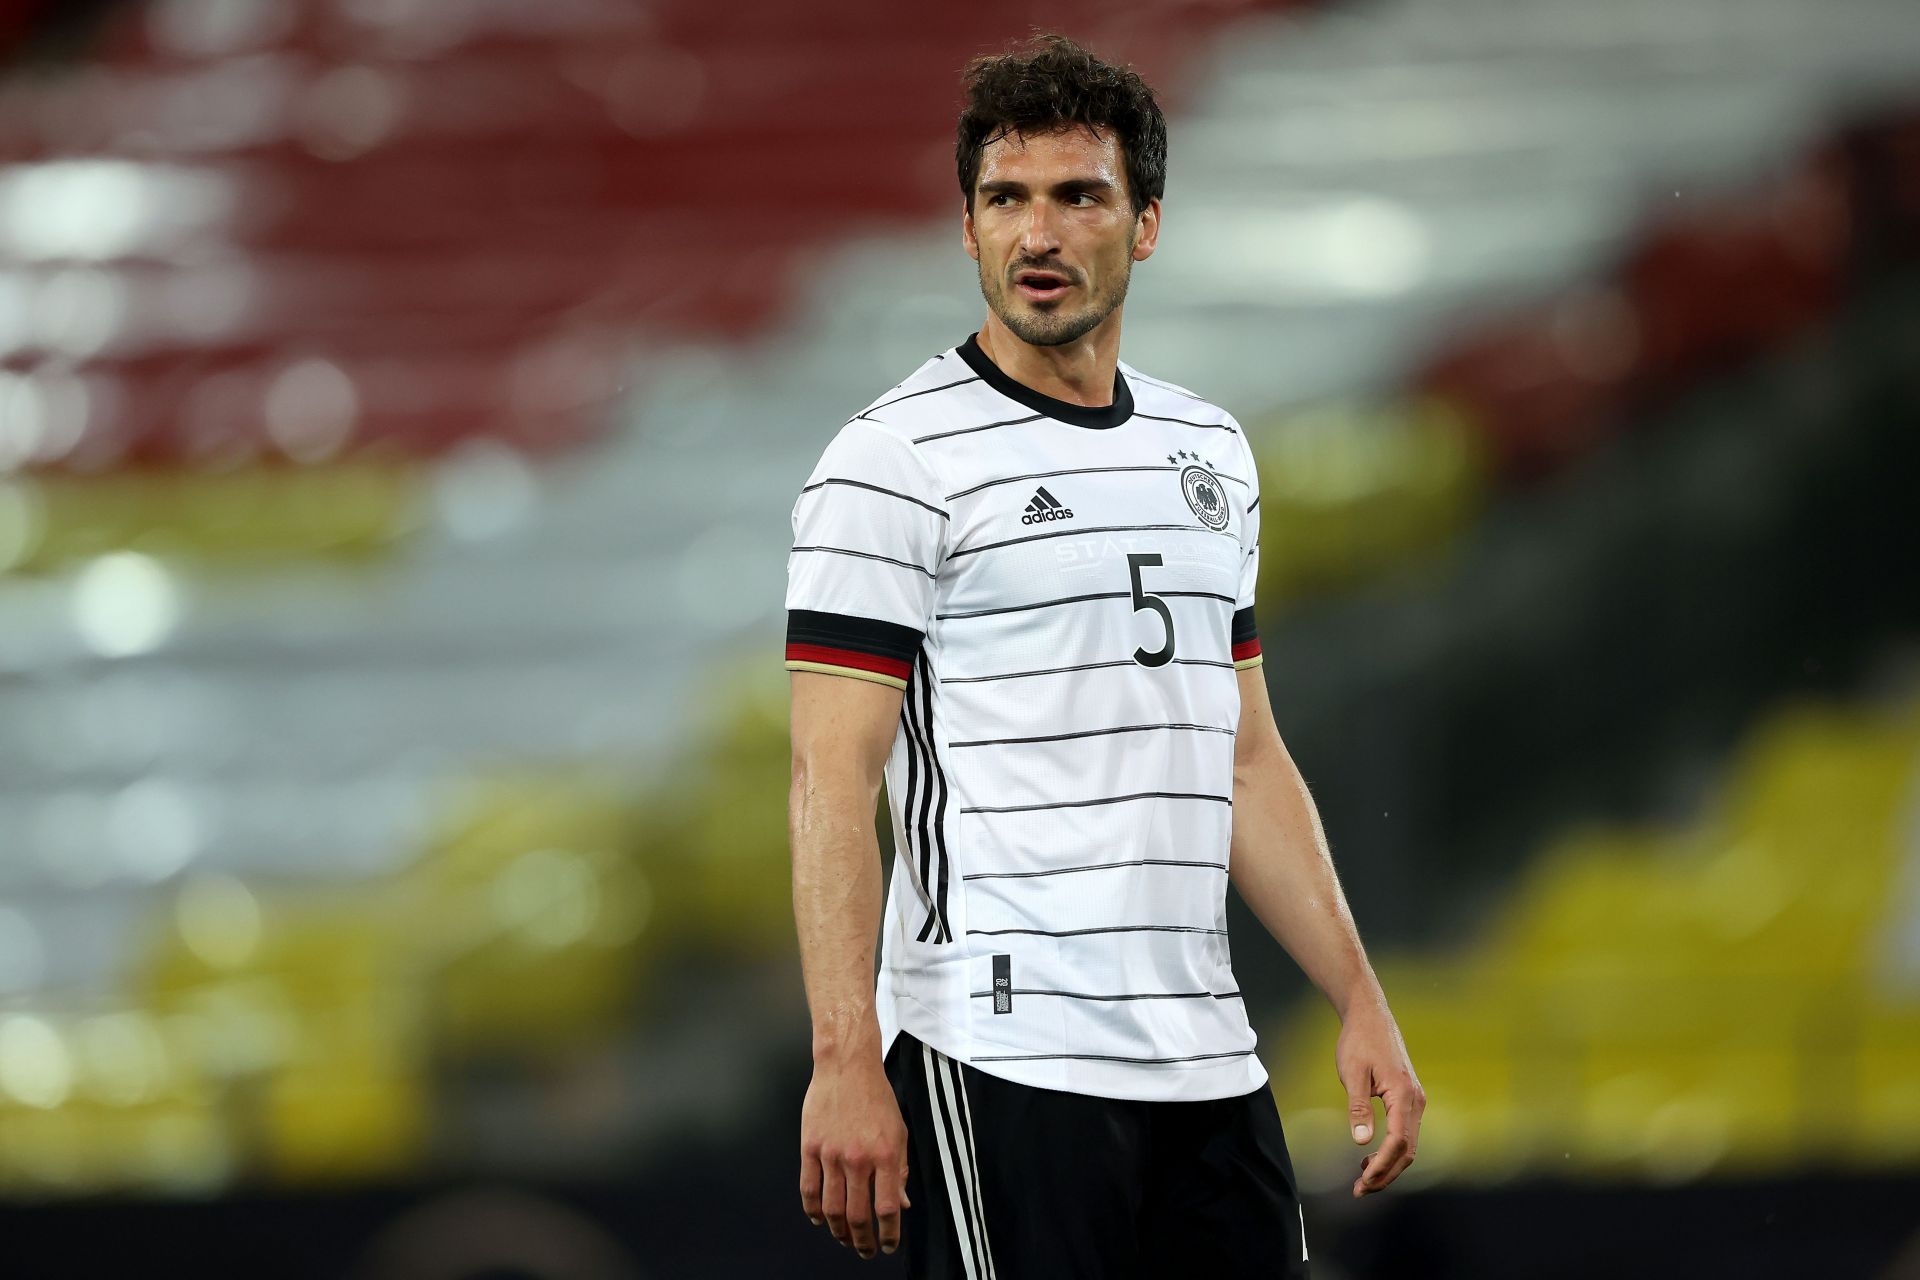 Mats Hummels in action for Germany during an international friendly against Denmark